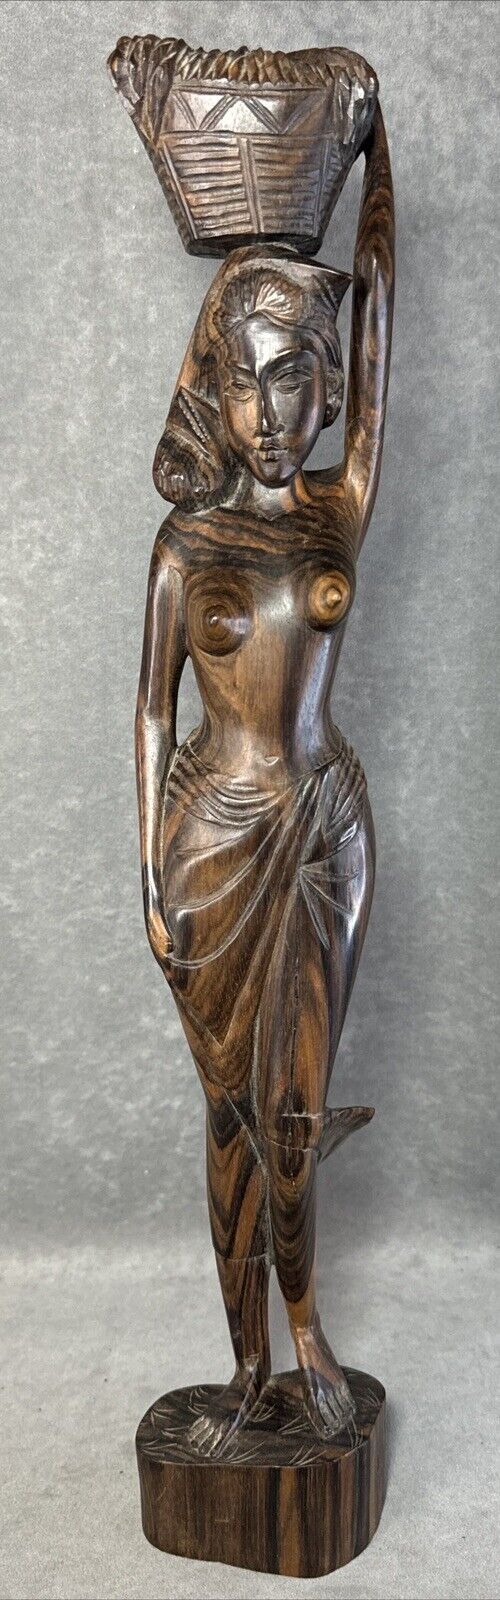 Vintage Indonesian Bali Statue Woman Carved Wood Sculpture 18” Tall